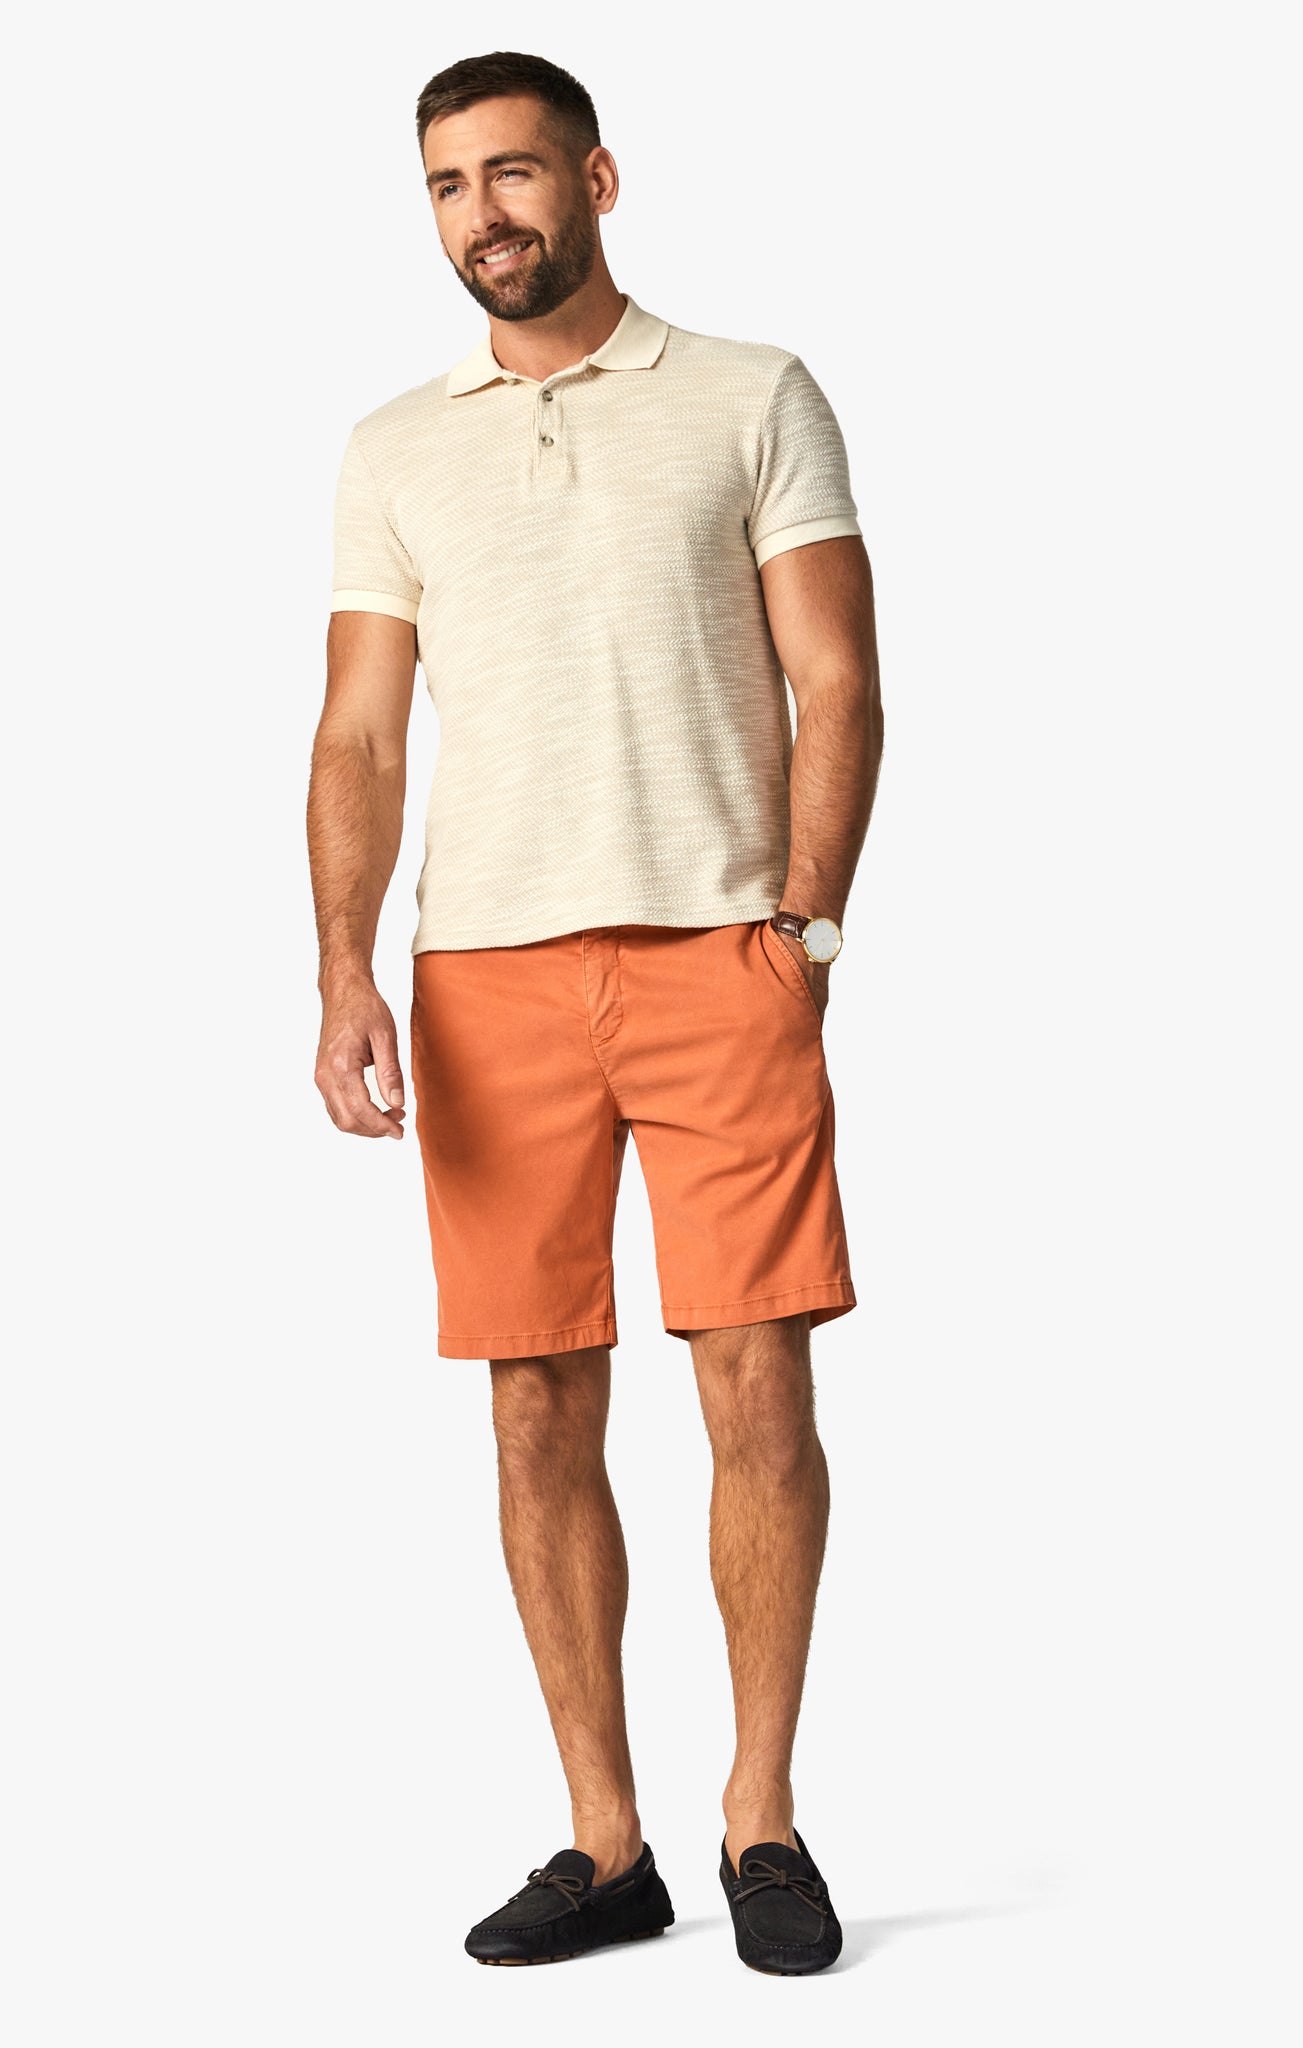 Nevada Shorts In Orange Rust Soft Touch